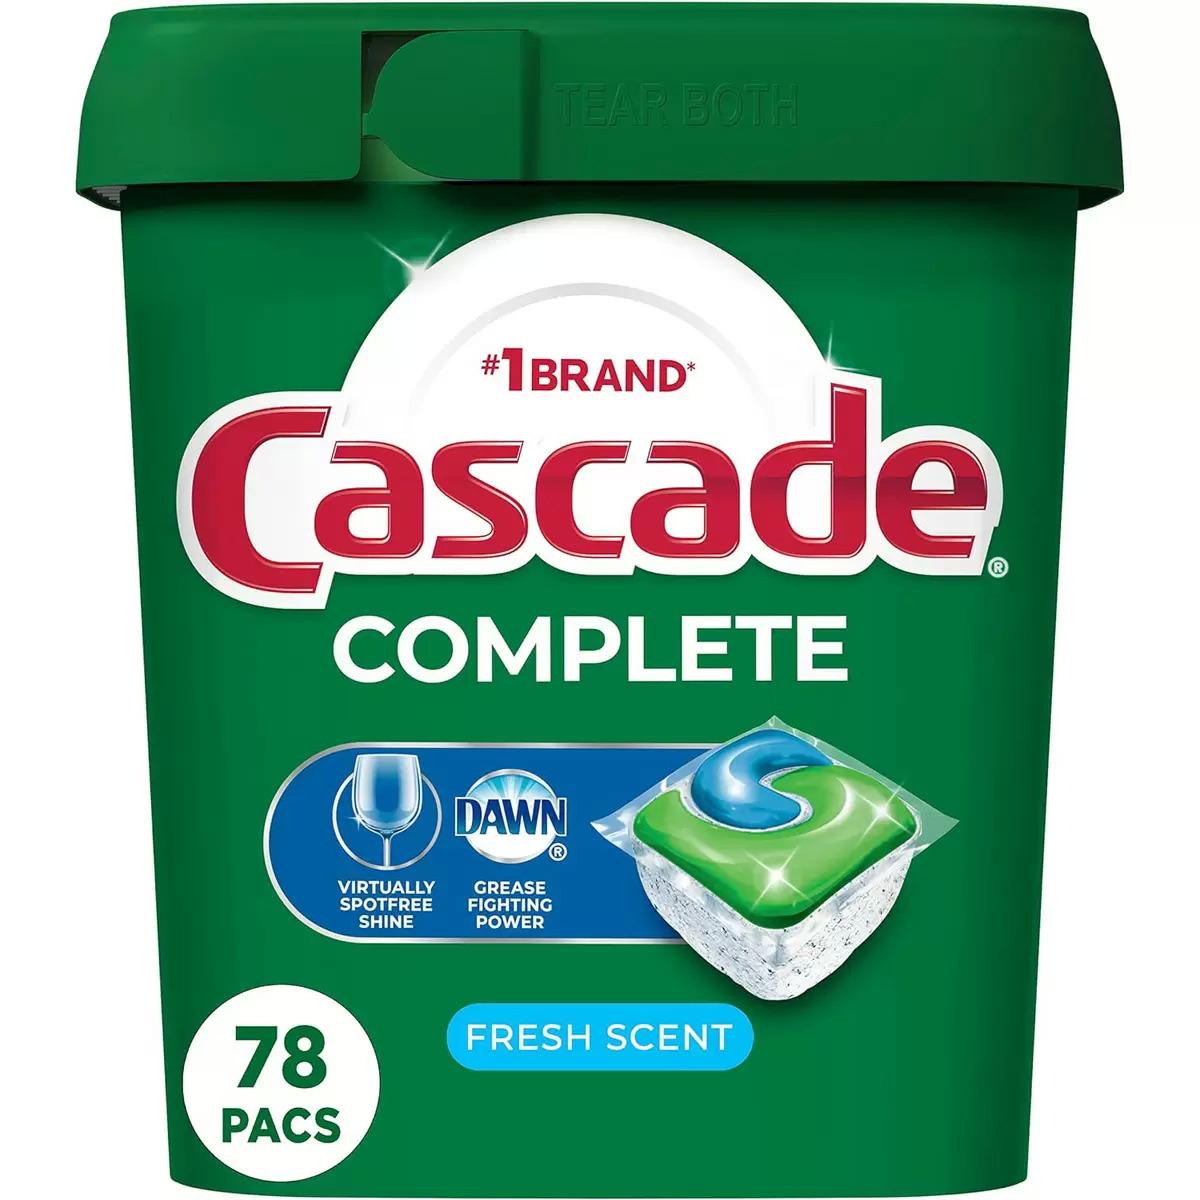 Cascade Complete Dishwasher Pods Fresh Scent 78 Pack for $9.66 Shipped